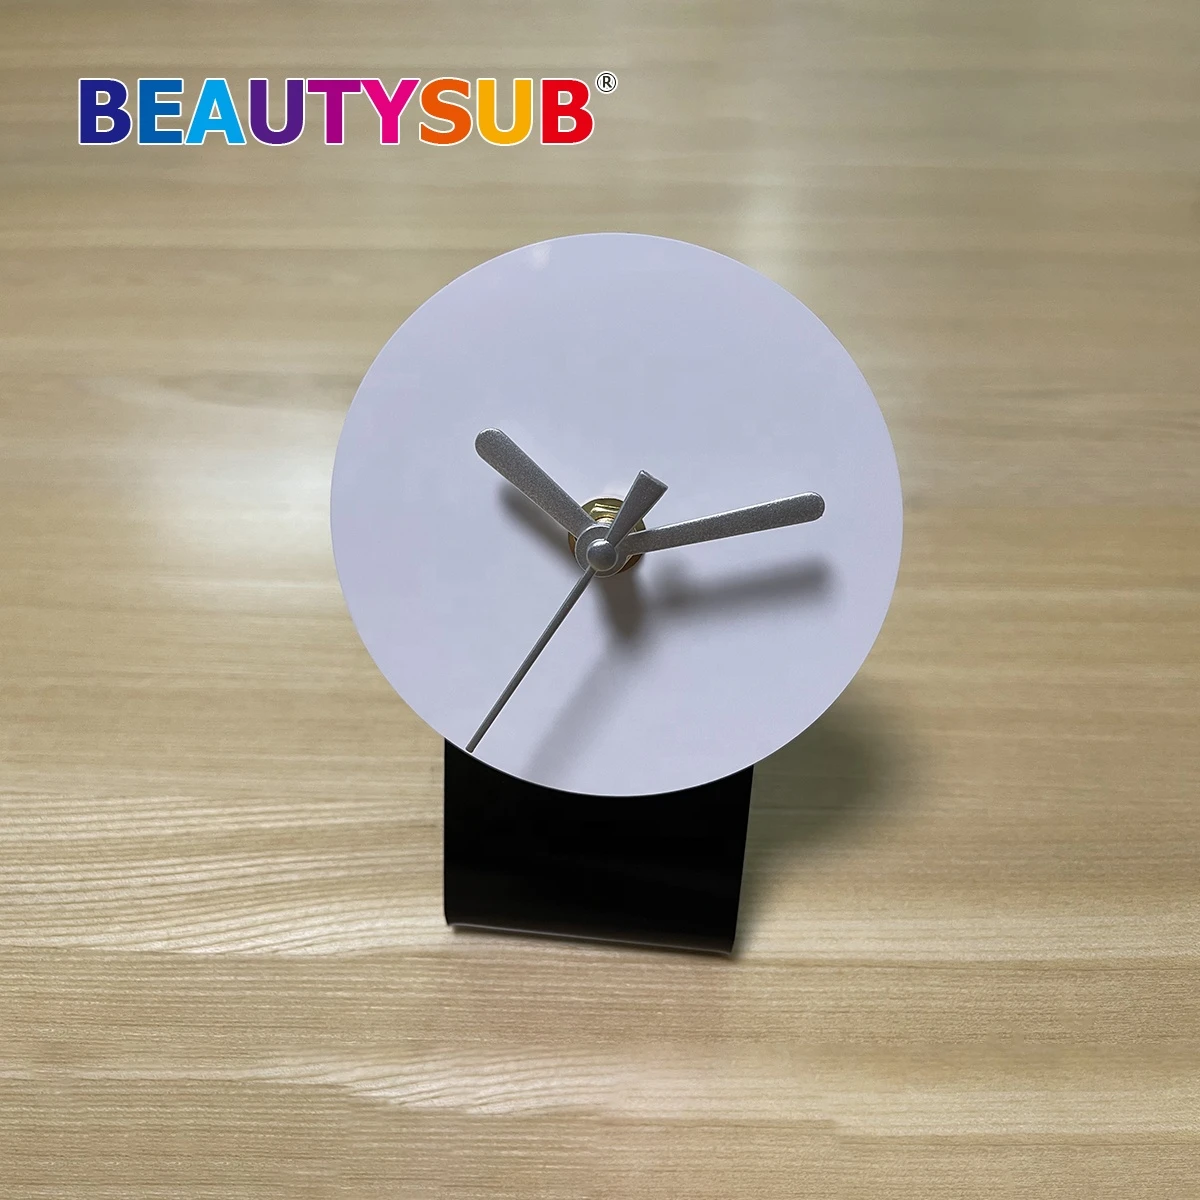 LS-CC002 HD sublimation Aluminum Clock dye sublimation metal clocks gloss white blanks with movement for heat transfer printing